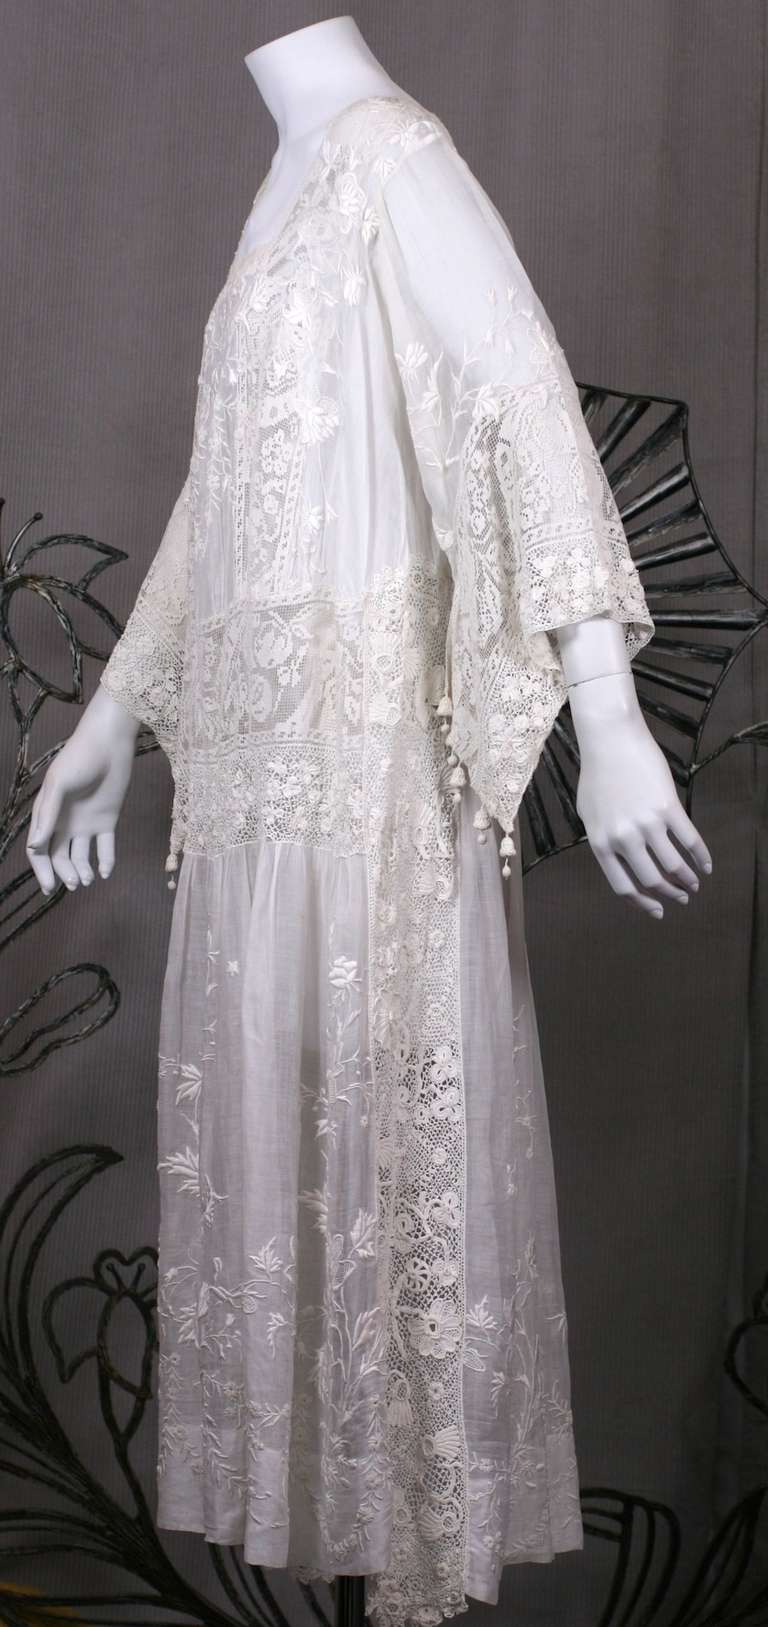 Afternoon dress from the 1920's with elaborate floral embroidery and inserts of Irish crochet work and Filet. Incredible handwork and craftsmanship with handmade bell ornaments hanging from sleeve edge. France 1920's , Very Good Condition. Small